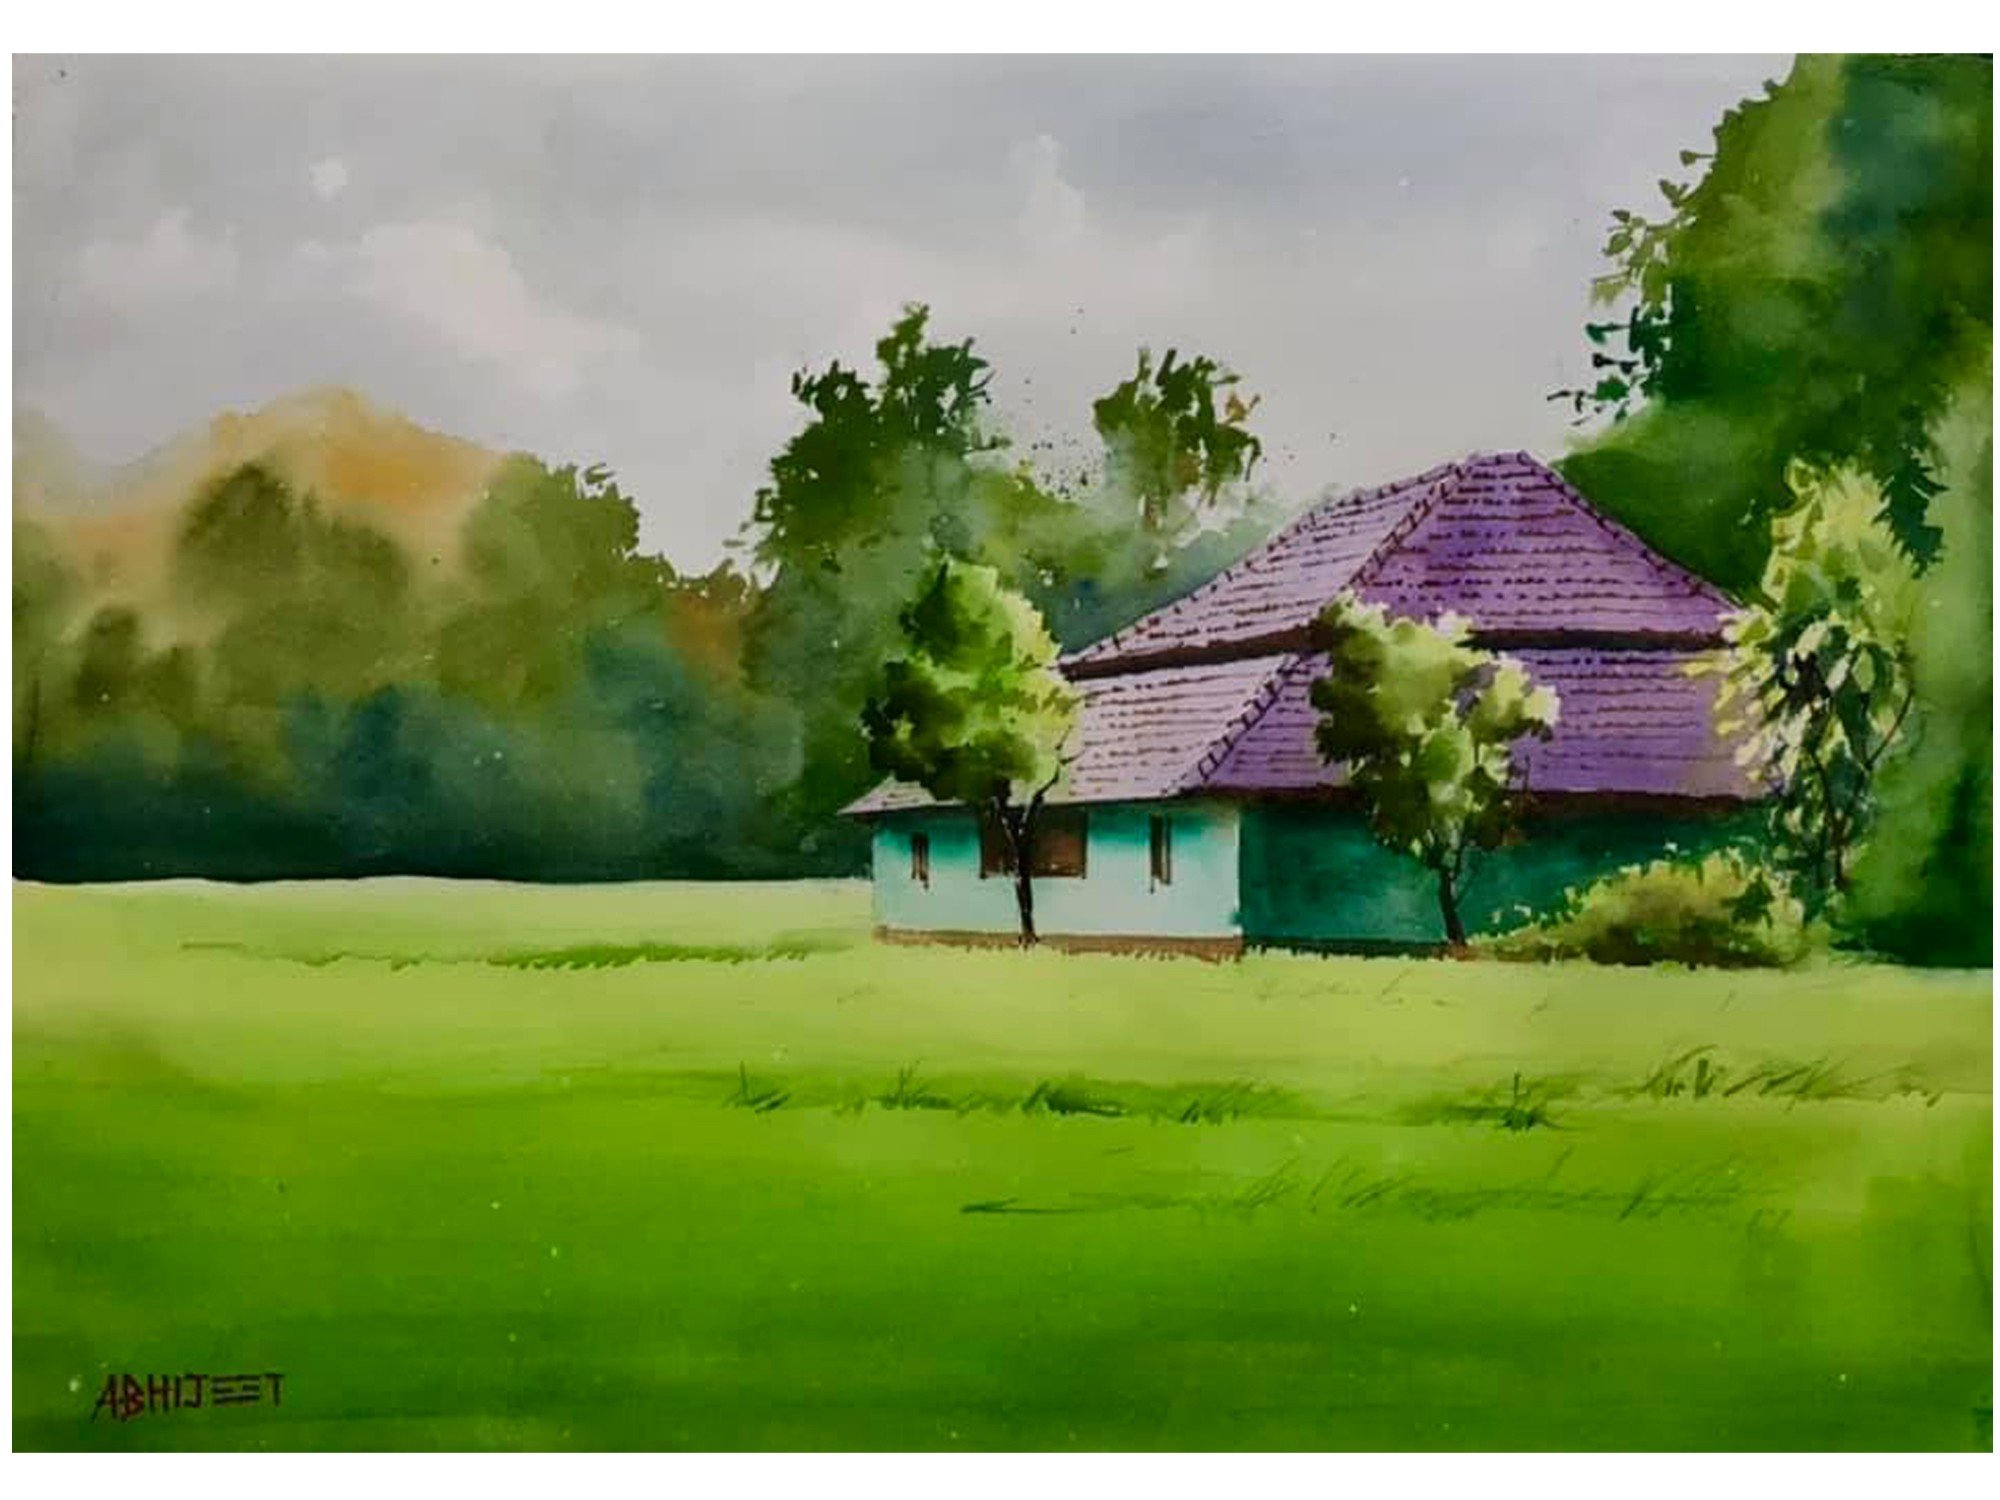 Buy Handmade watercolor paintings/ Landscape/ 16√ó23 inch Handmade Painting  by GOVIND JHA. Code:ART_8771_69909 - Paintings for Sale online in India.